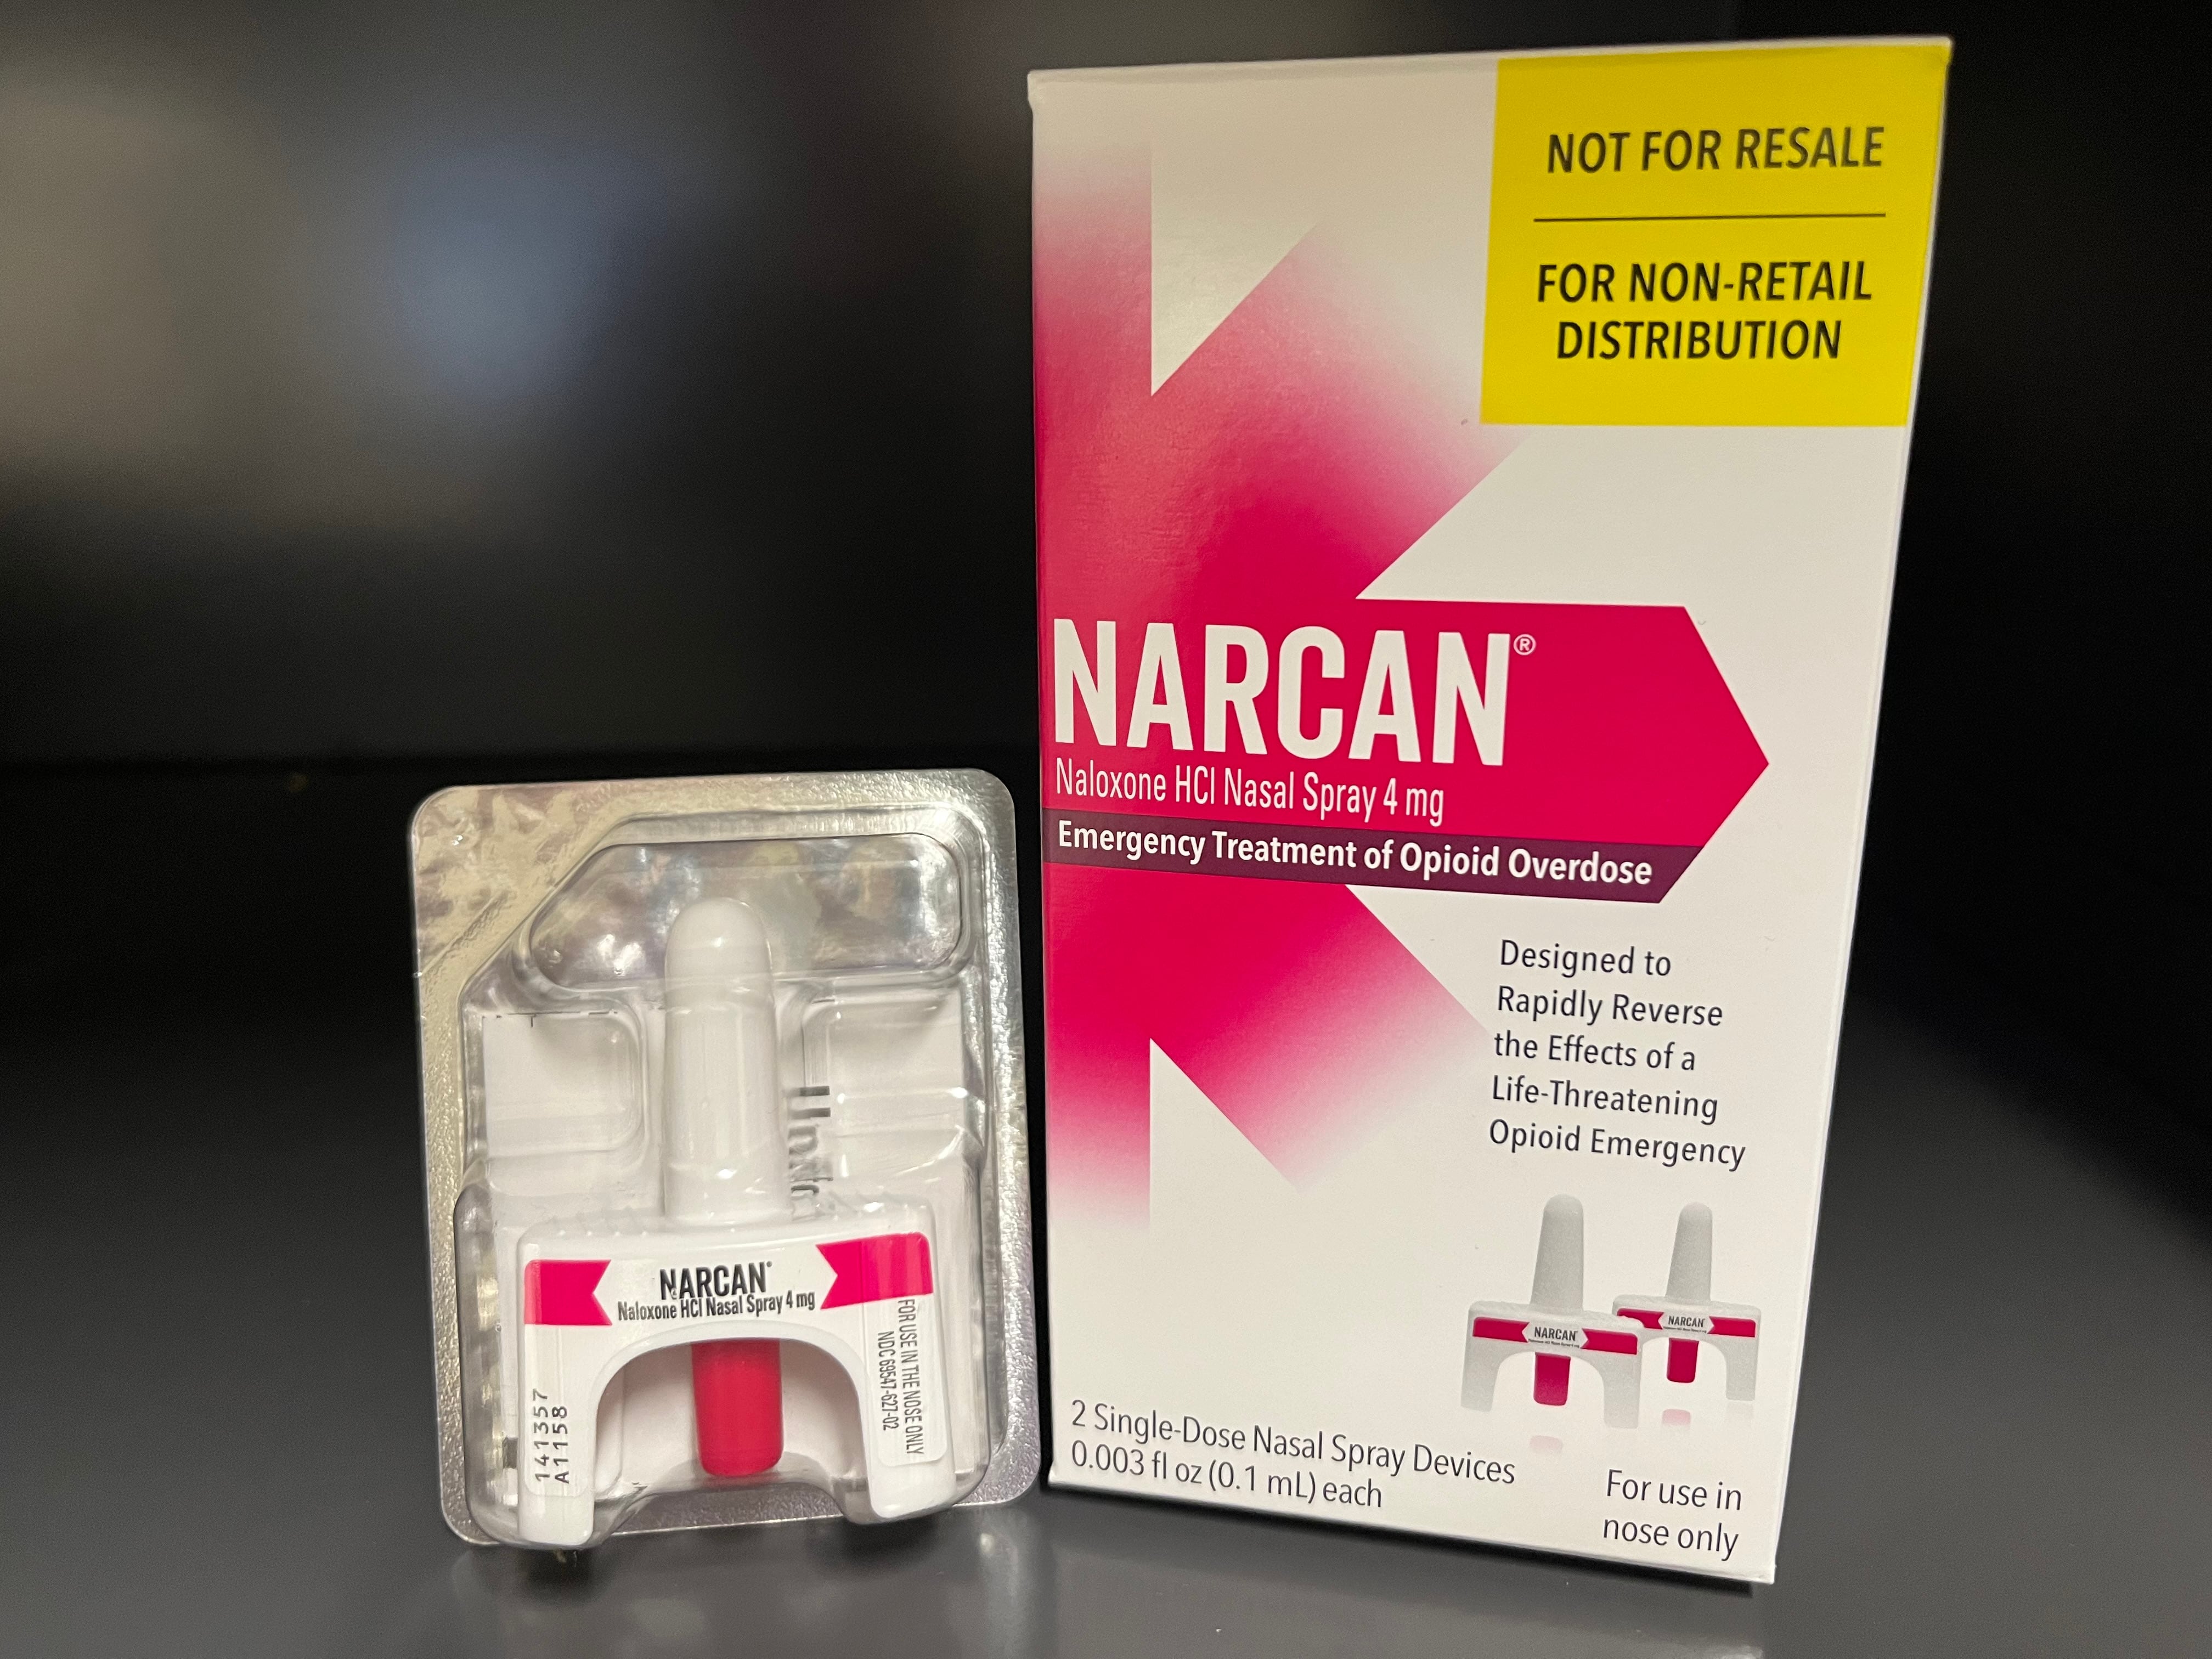 Kane Health Department gives out free naloxone to stop overdose deaths